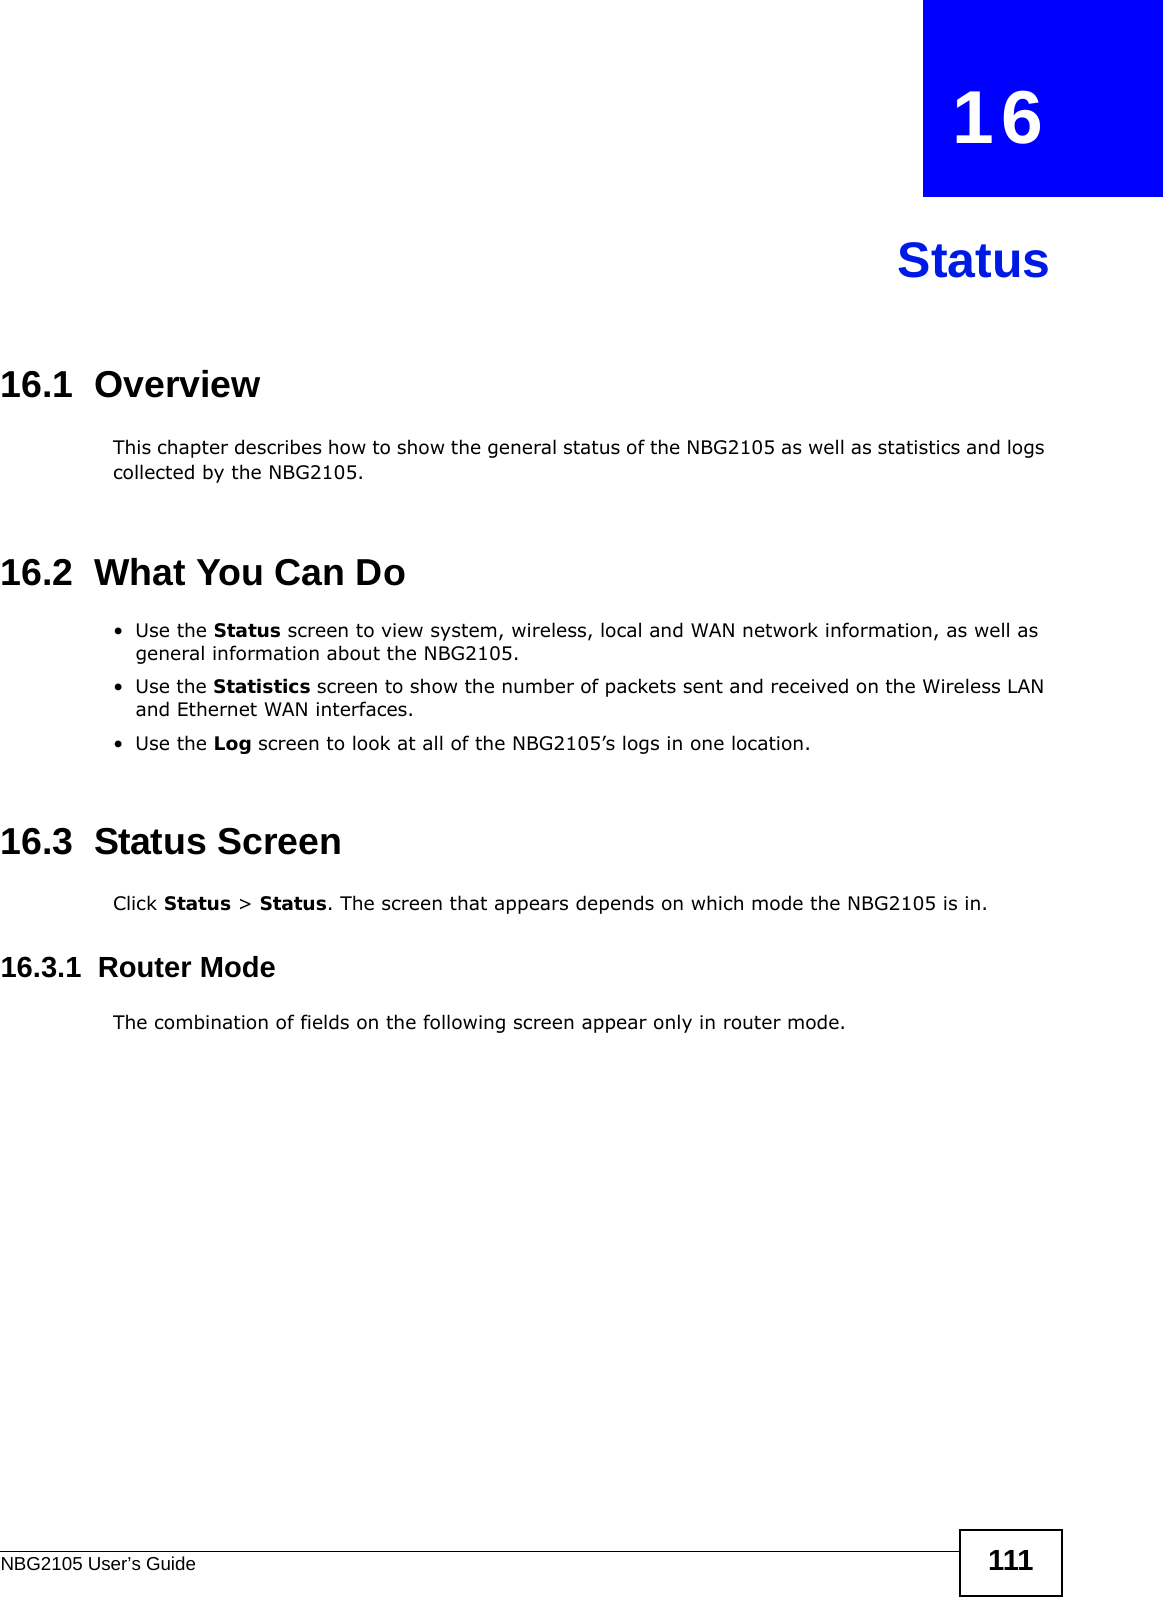 NBG2105 User’s Guide 111CHAPTER   16Status16.1  OverviewThis chapter describes how to show the general status of the NBG2105 as well as statistics and logs collected by the NBG2105.16.2  What You Can Do•Use the Status screen to view system, wireless, local and WAN network information, as well as general information about the NBG2105.•Use the Statistics screen to show the number of packets sent and received on the Wireless LAN and Ethernet WAN interfaces.•Use the Log screen to look at all of the NBG2105’s logs in one location.16.3  Status ScreenClick Status &gt; Status. The screen that appears depends on which mode the NBG2105 is in.16.3.1  Router ModeThe combination of fields on the following screen appear only in router mode.